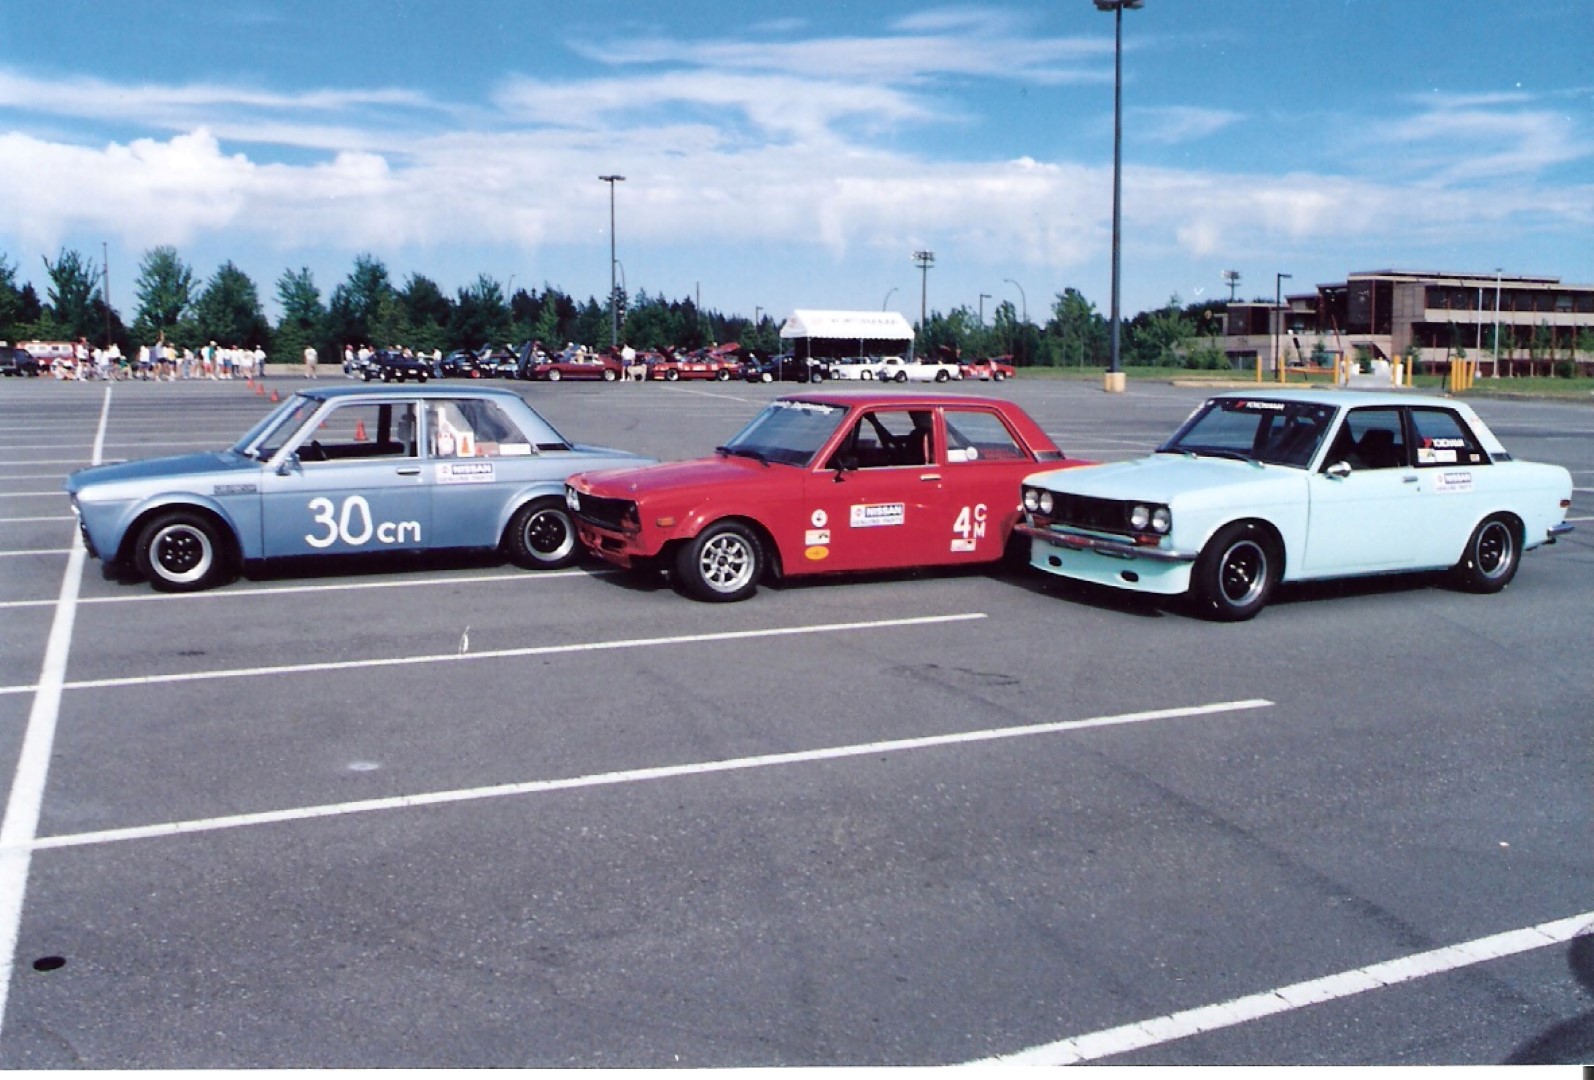 Dave Christie, my car, Brent Wilson at the 1991 Canadian National Solo at UBC.